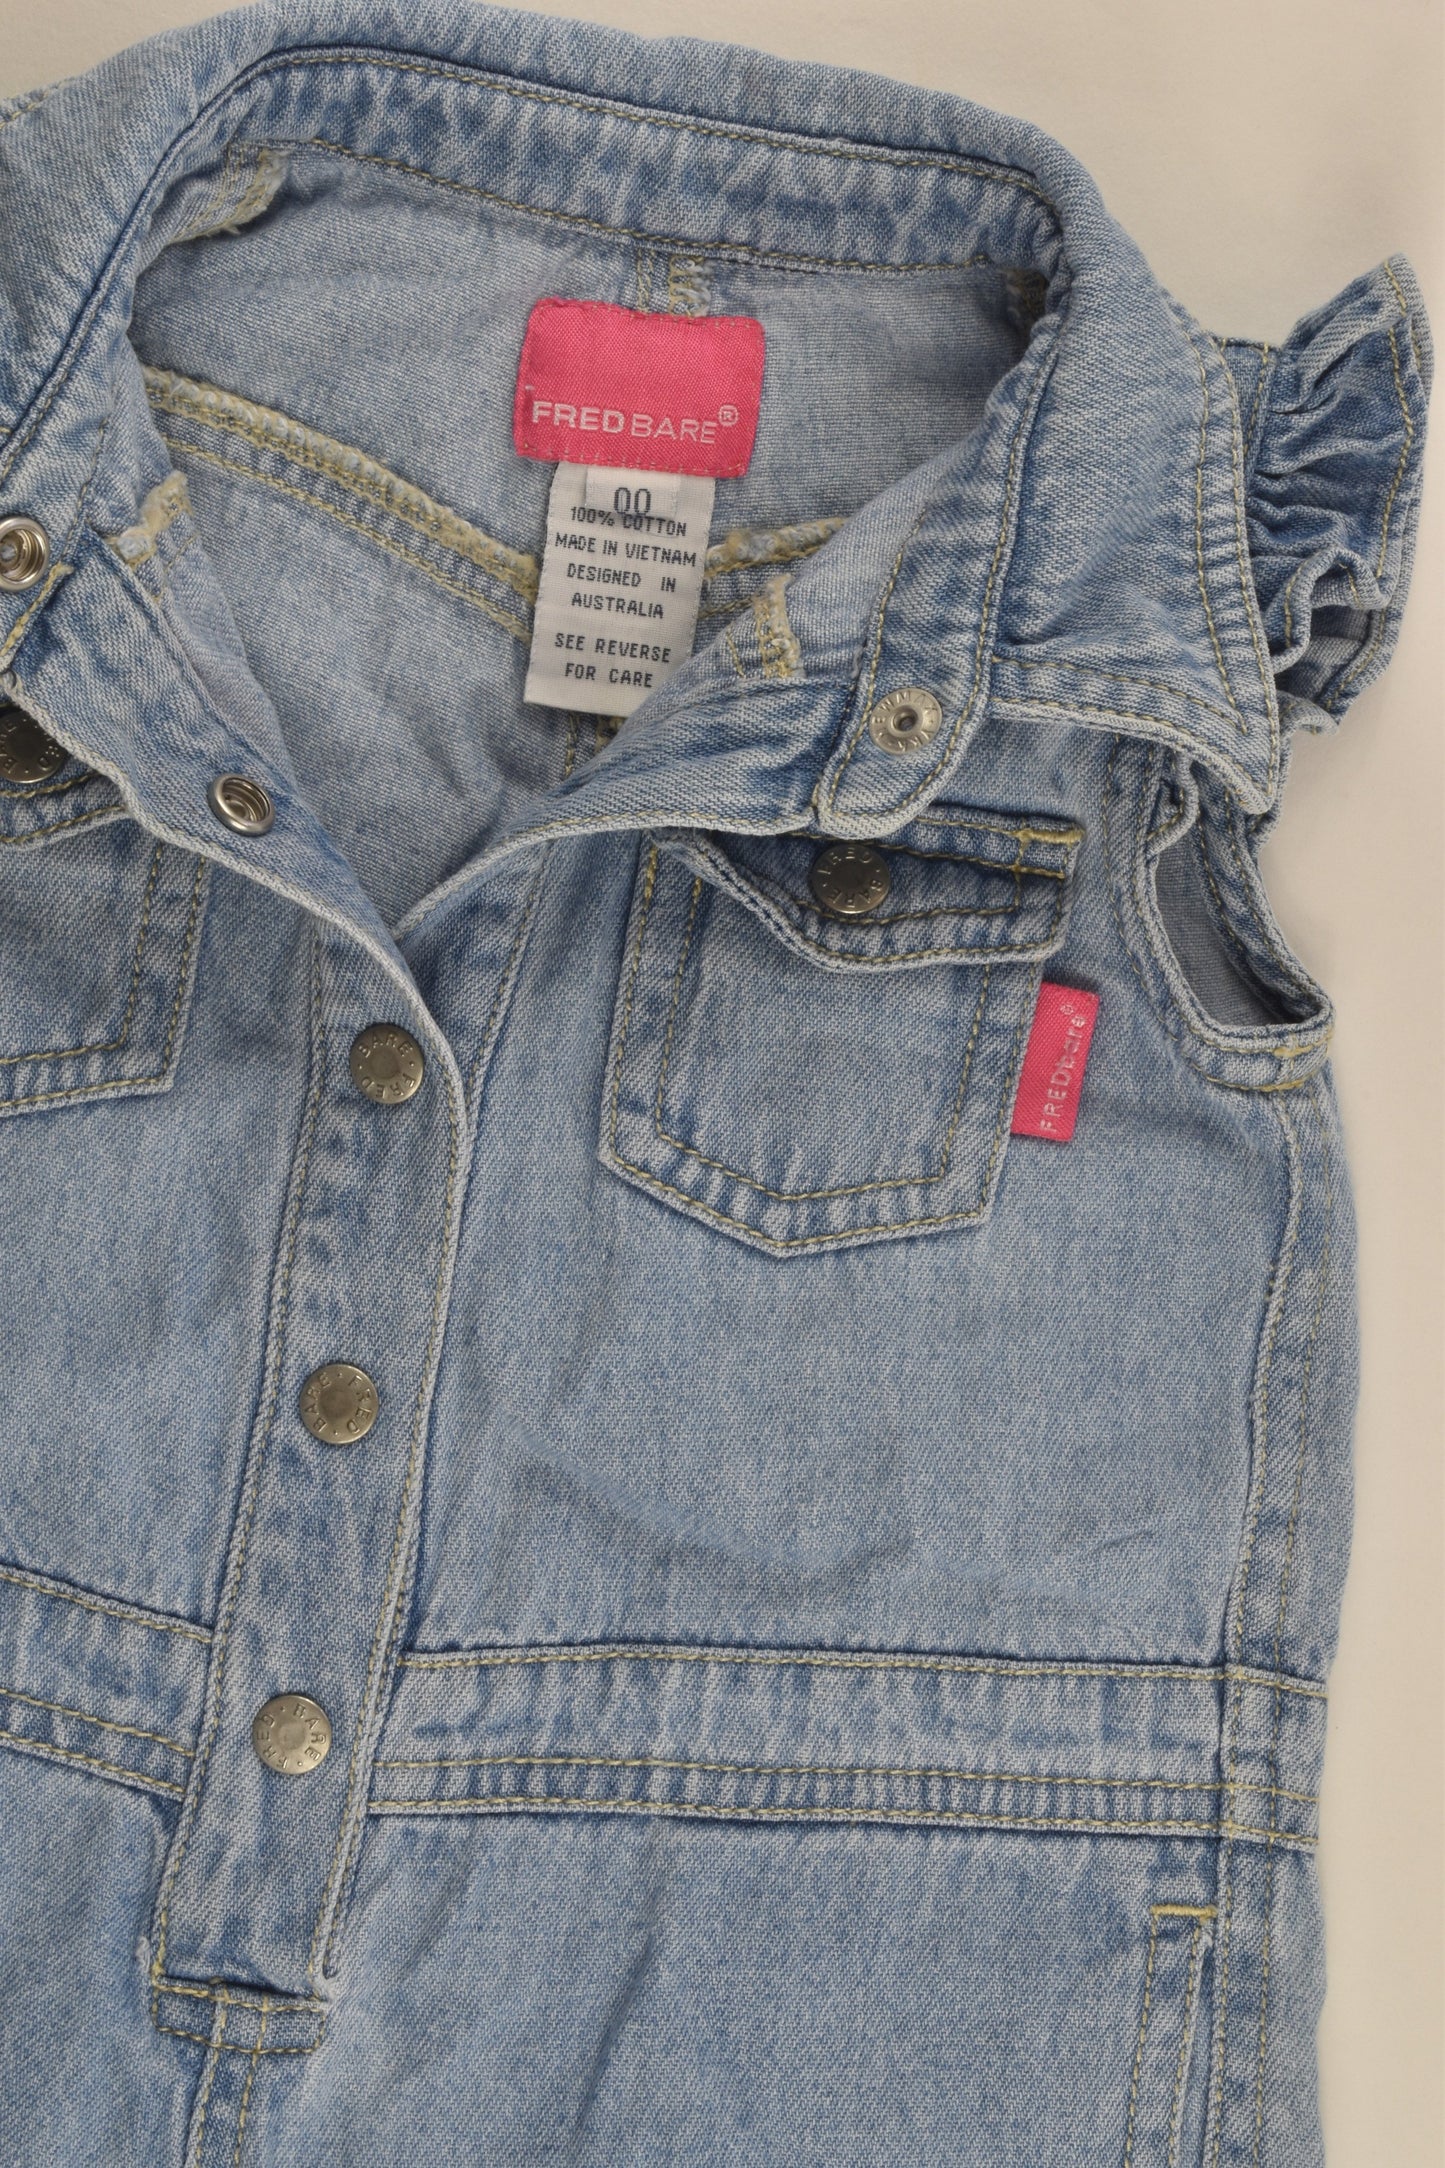 Fred Bare Size 00 Denim Playsuit